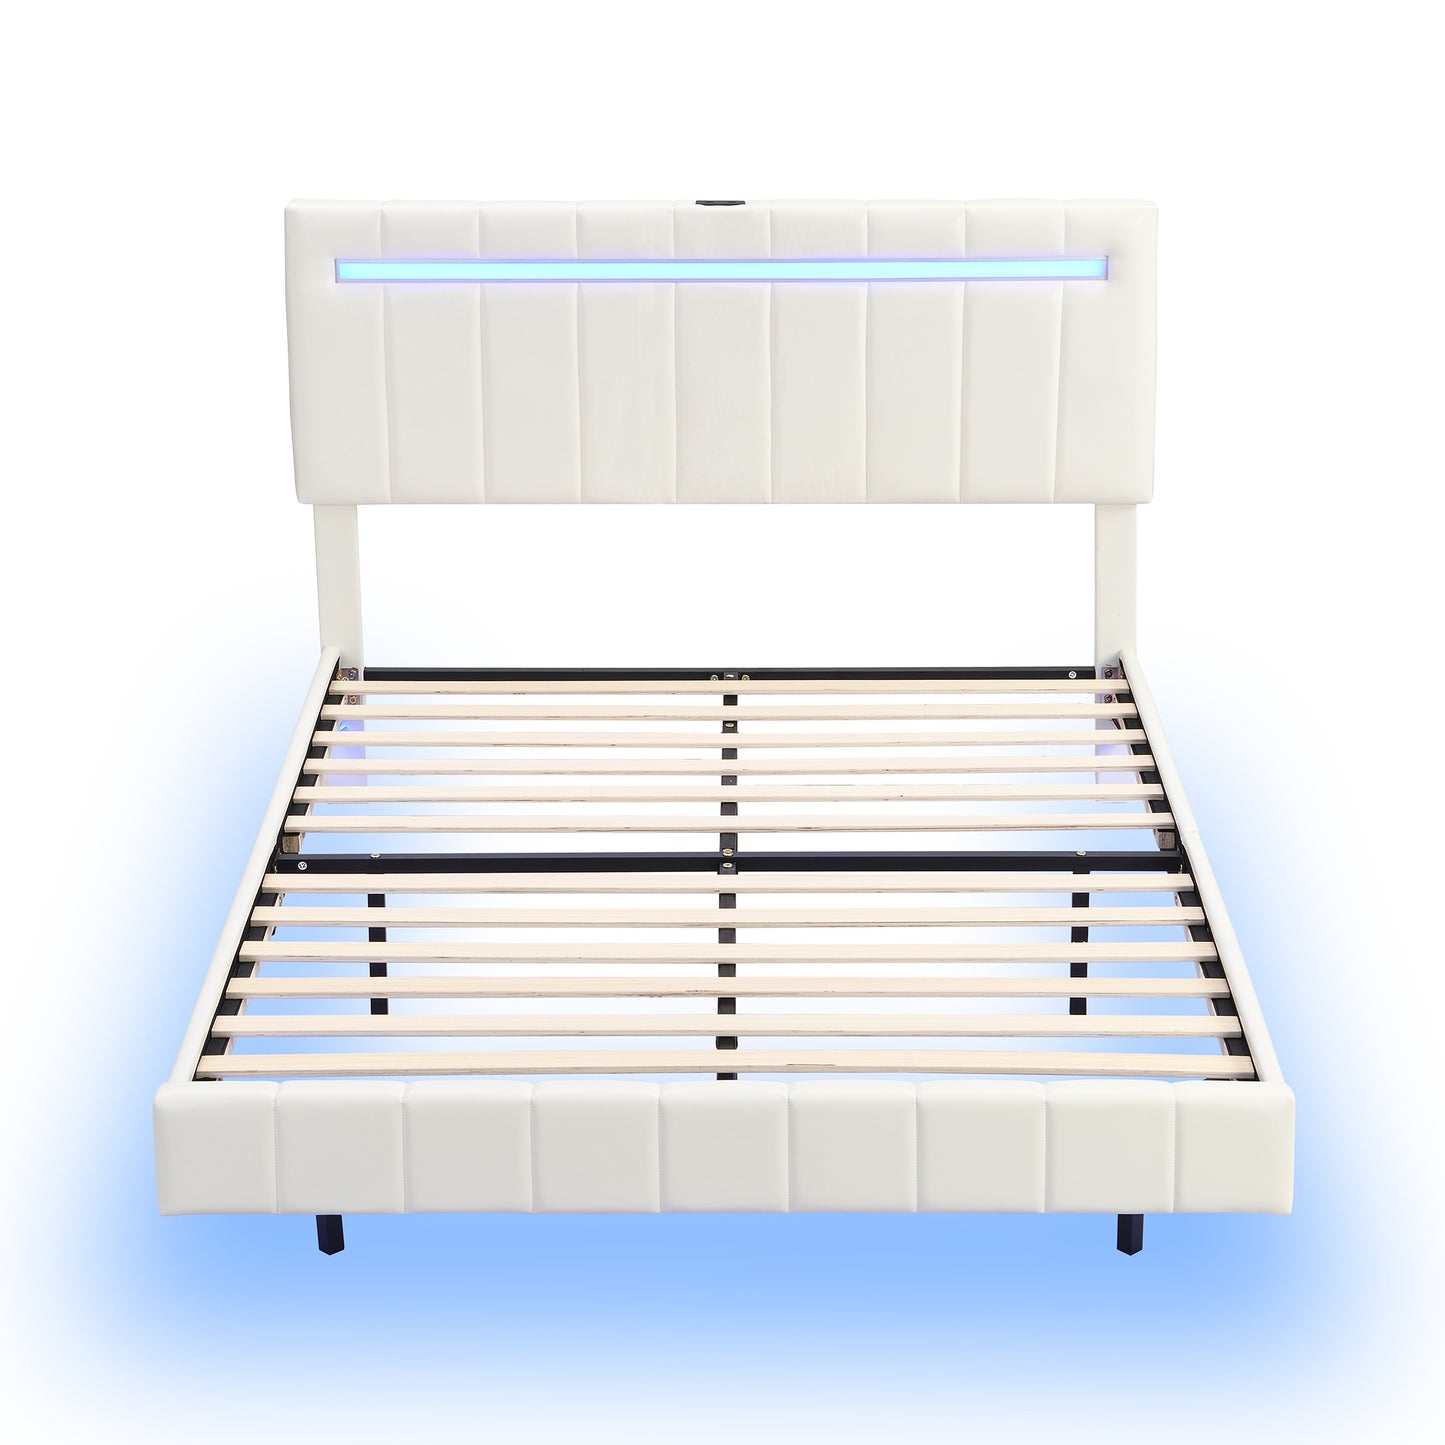 floating bed frame with led lights and usb charging